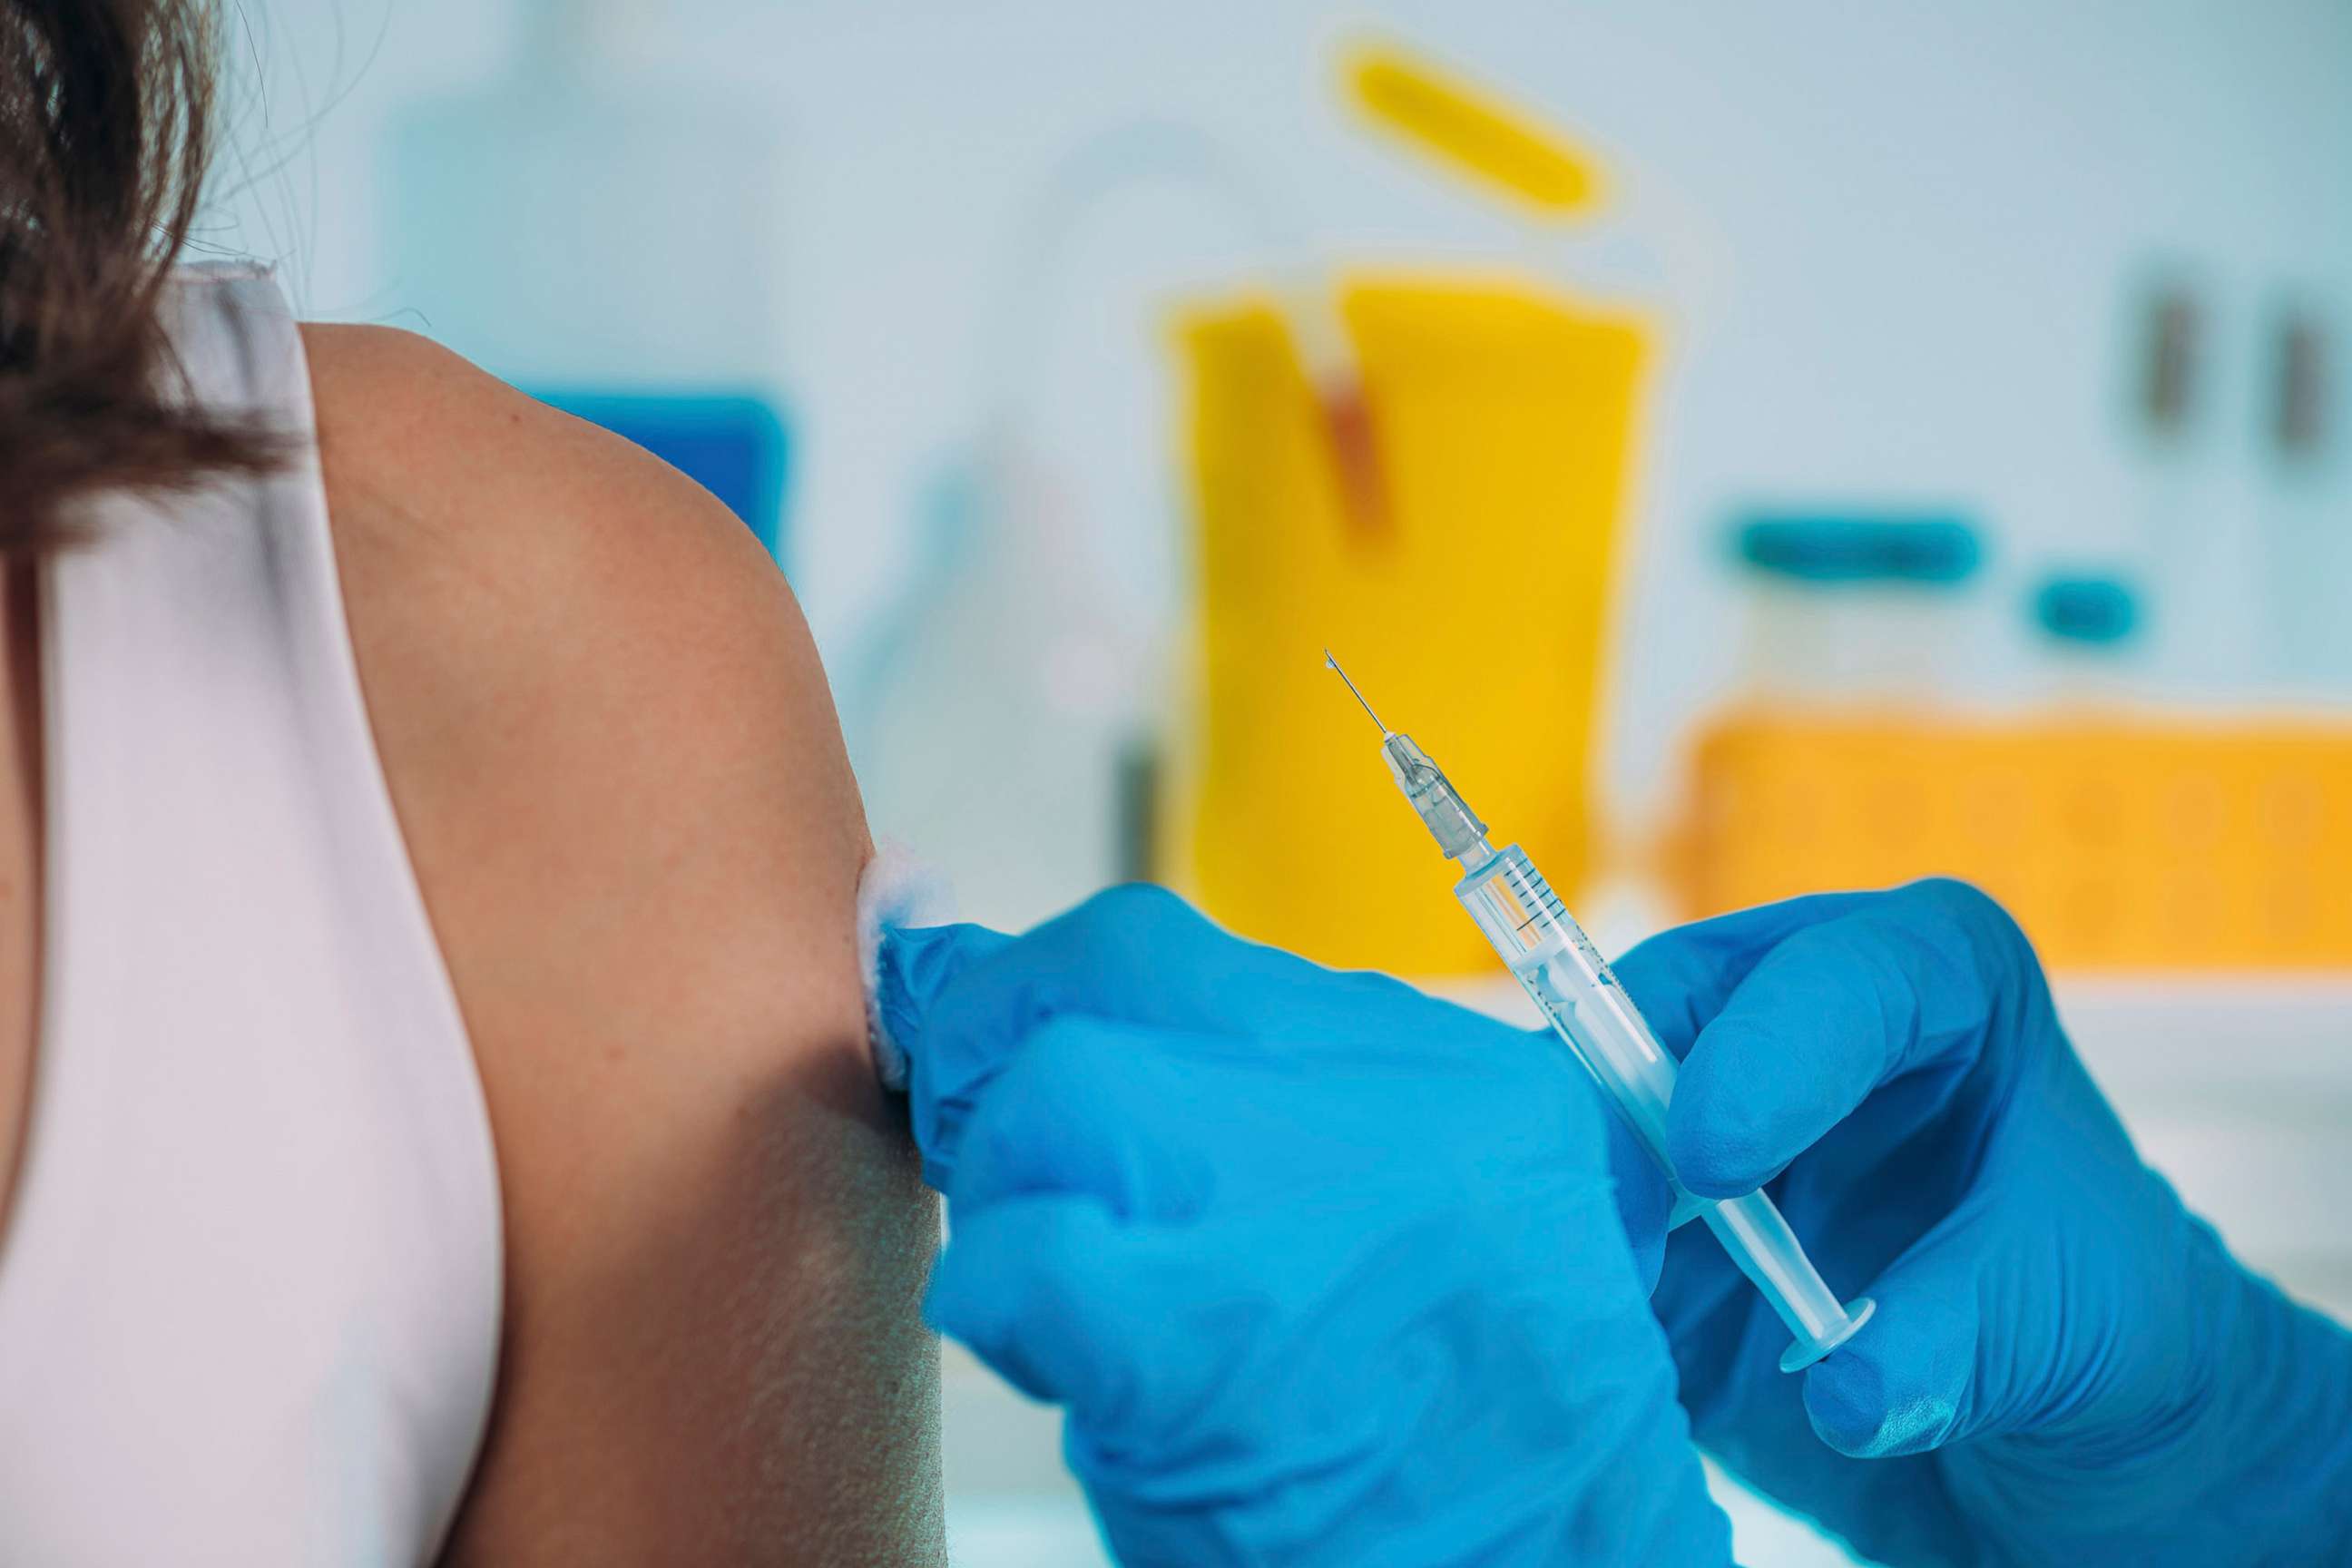 PHOTO: A vaccine is being administered by a medical professional in this stock image.